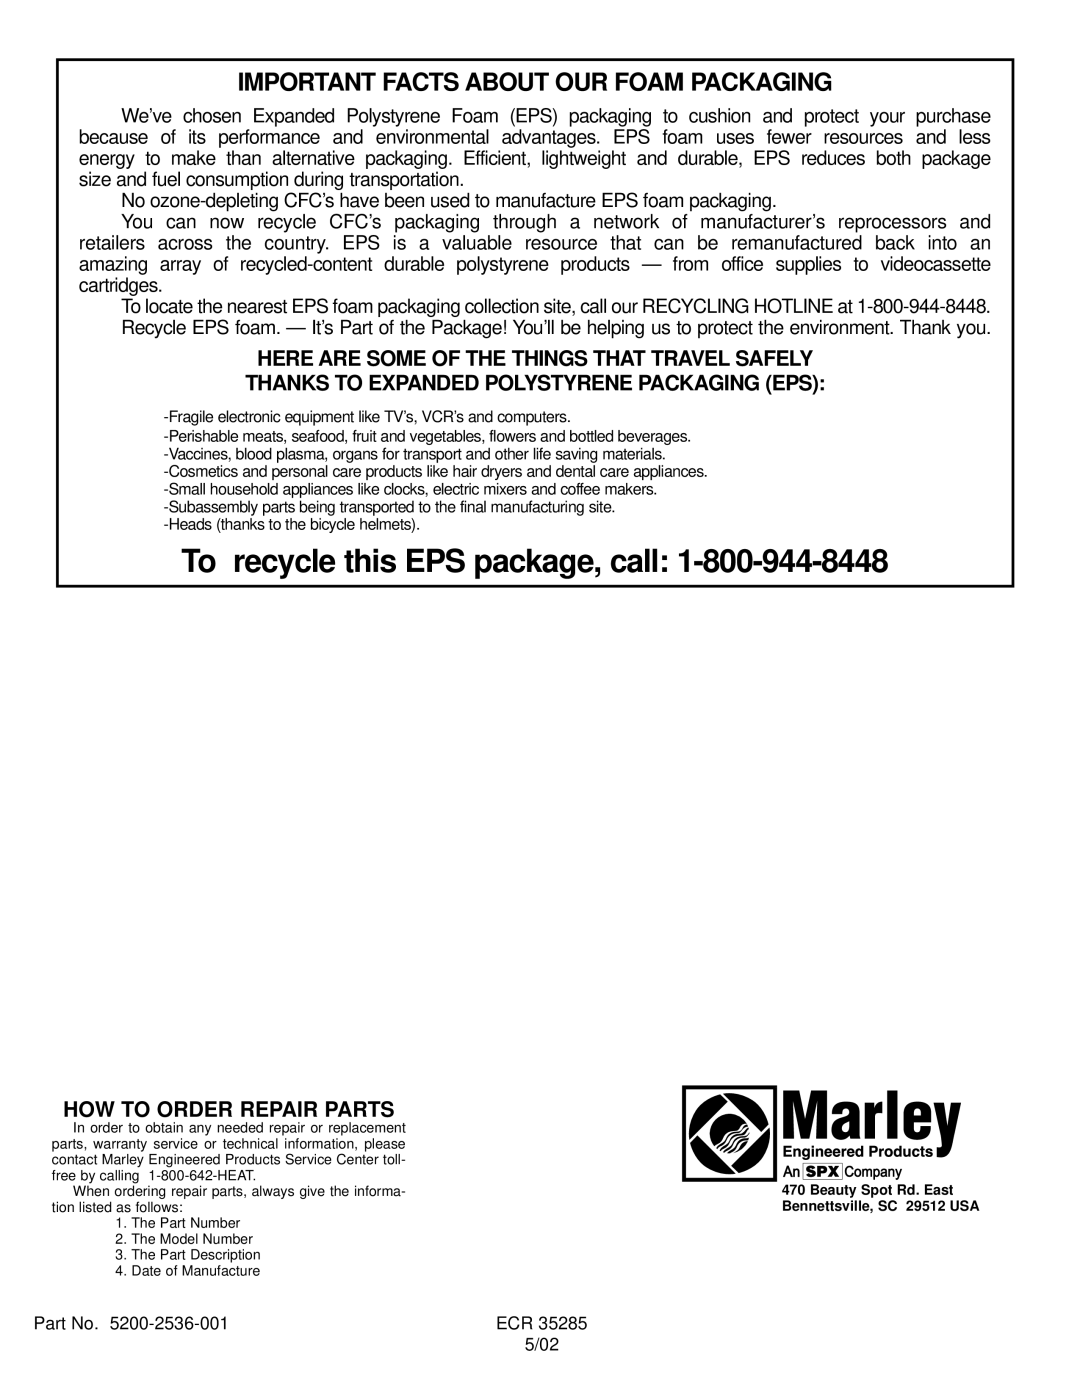 Marley Engineered Products 994 manual To recycle this EPS package, call, Here Are Some Of The Things That Travel Safely 